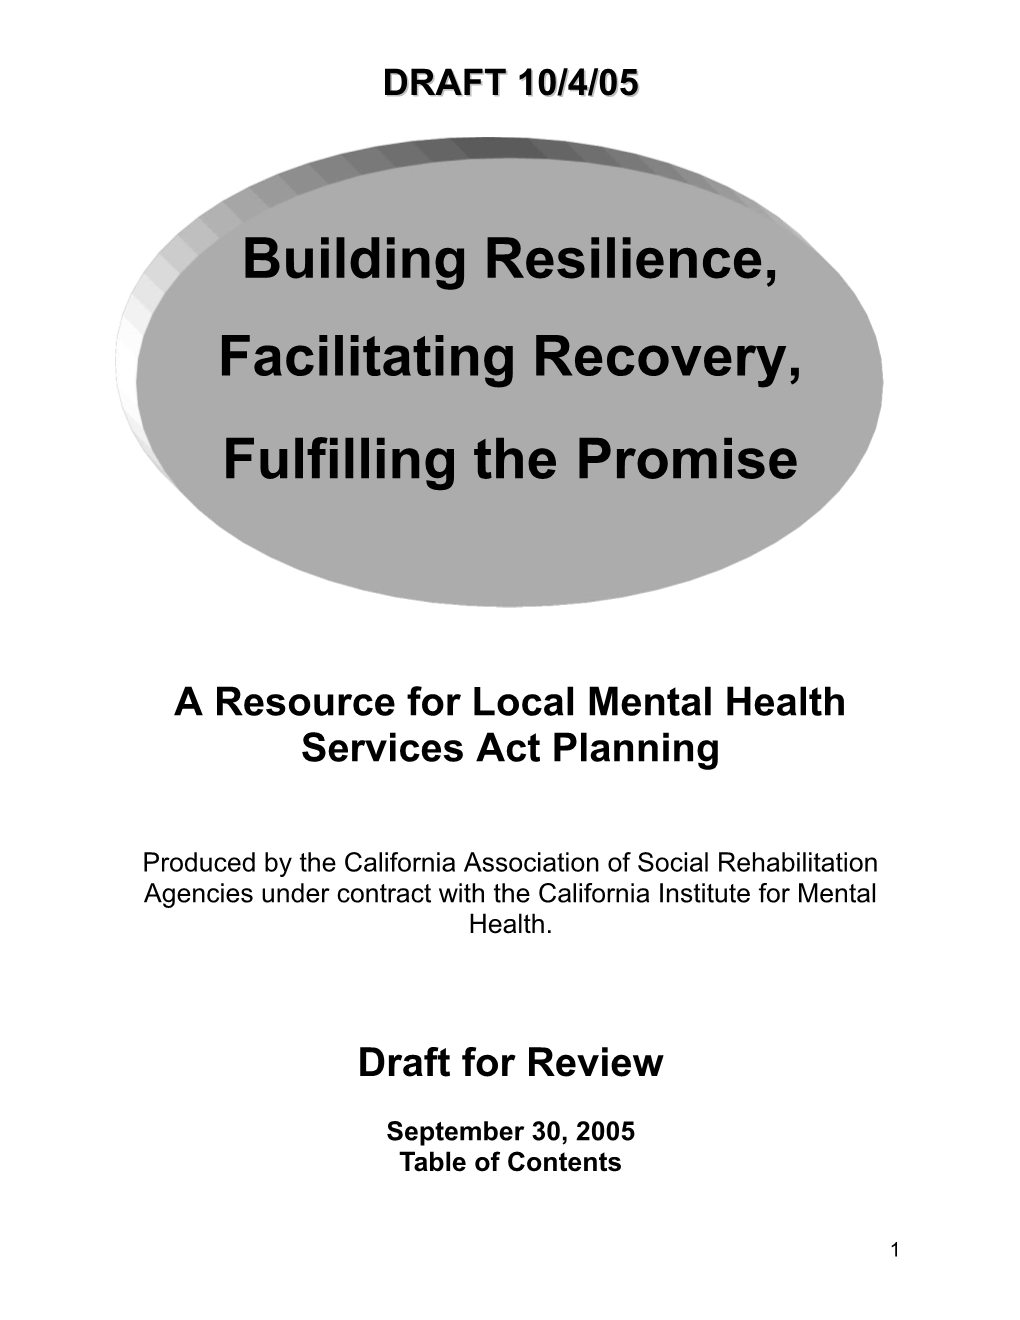 A Resource for Local Mental Health Services Act Planning